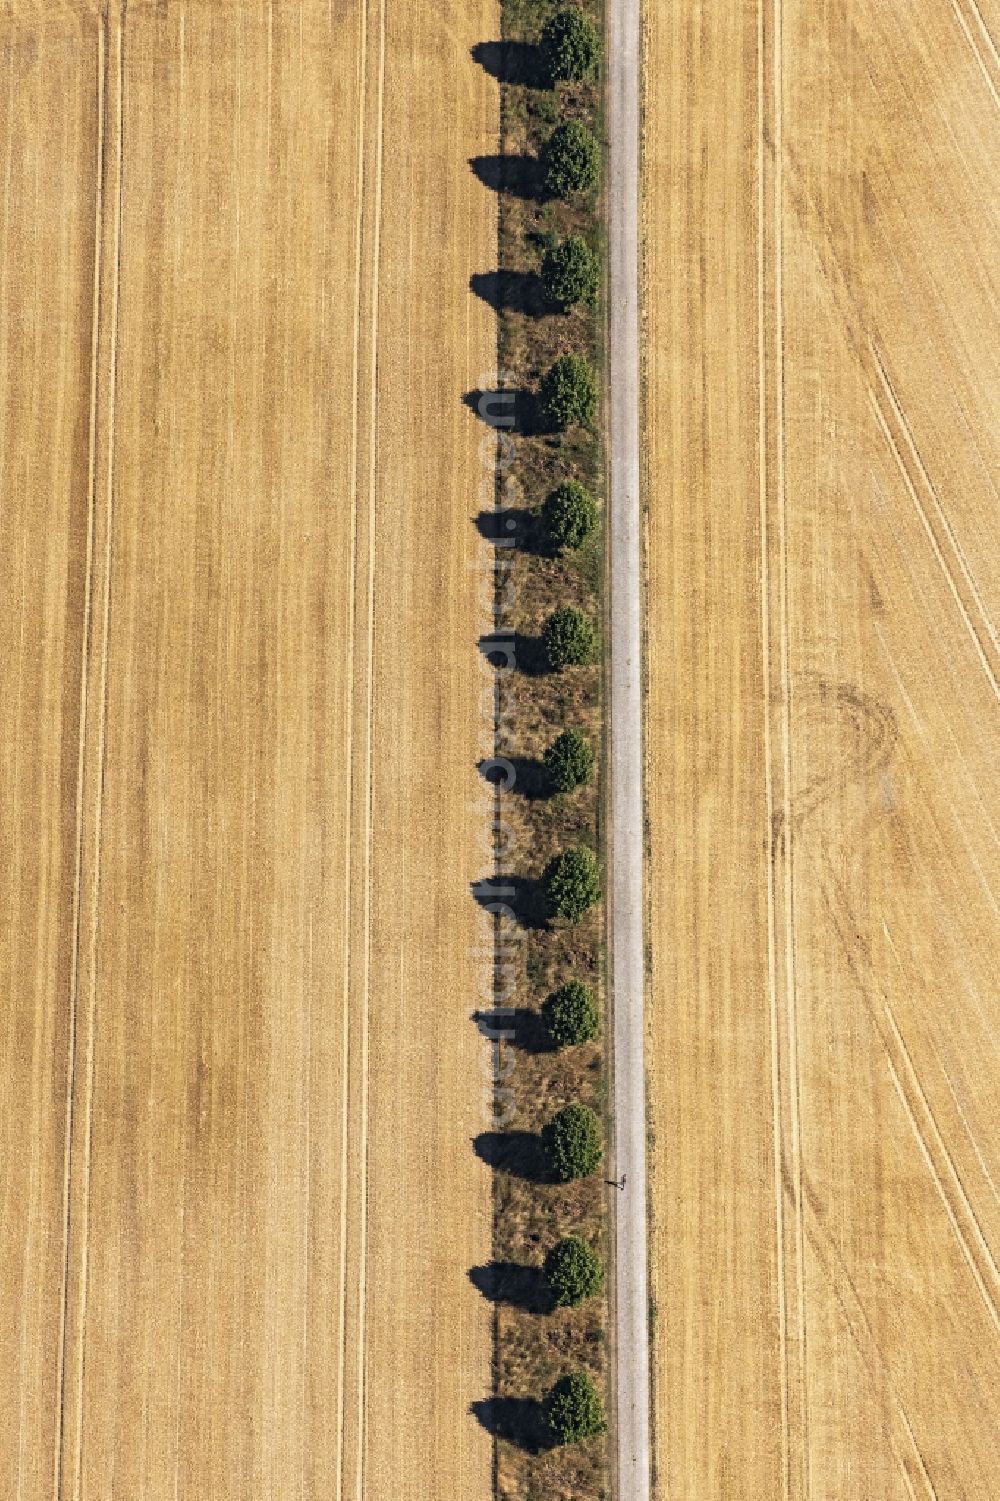 Vertical aerial photograph Hannover - Vertical aerial view from the satellite perspective of the row of trees on a country road on a field edge in Hannover in the state Lower Saxony, Germany